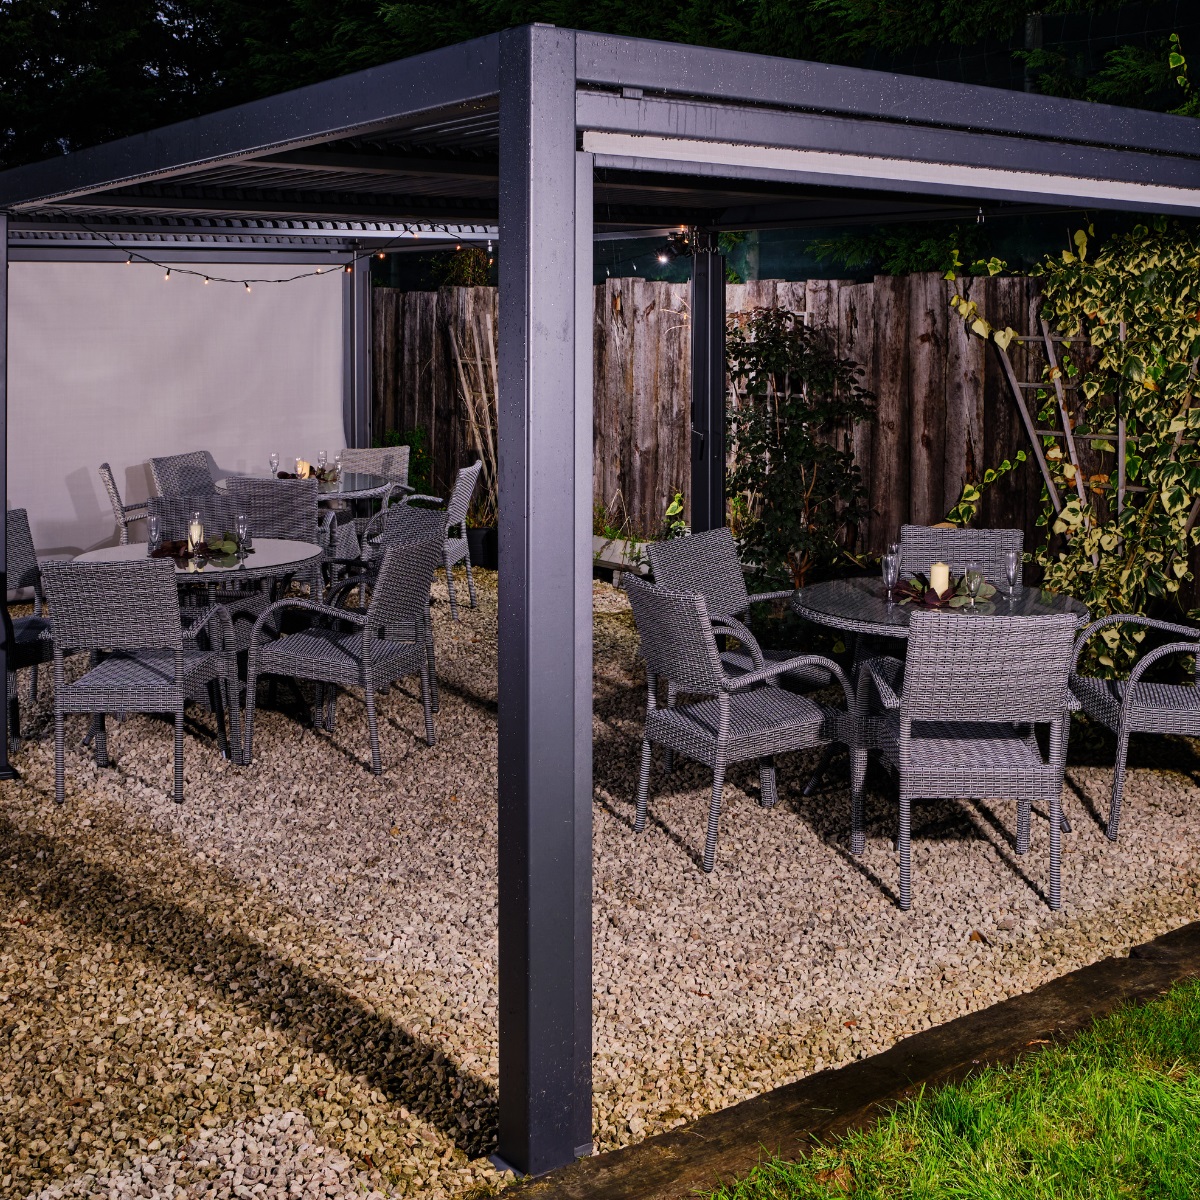 A dark grey metal rectangular weather proof gazebo with a flat louvered panel roof and 3 grey rattan dining tables and chairs underneath